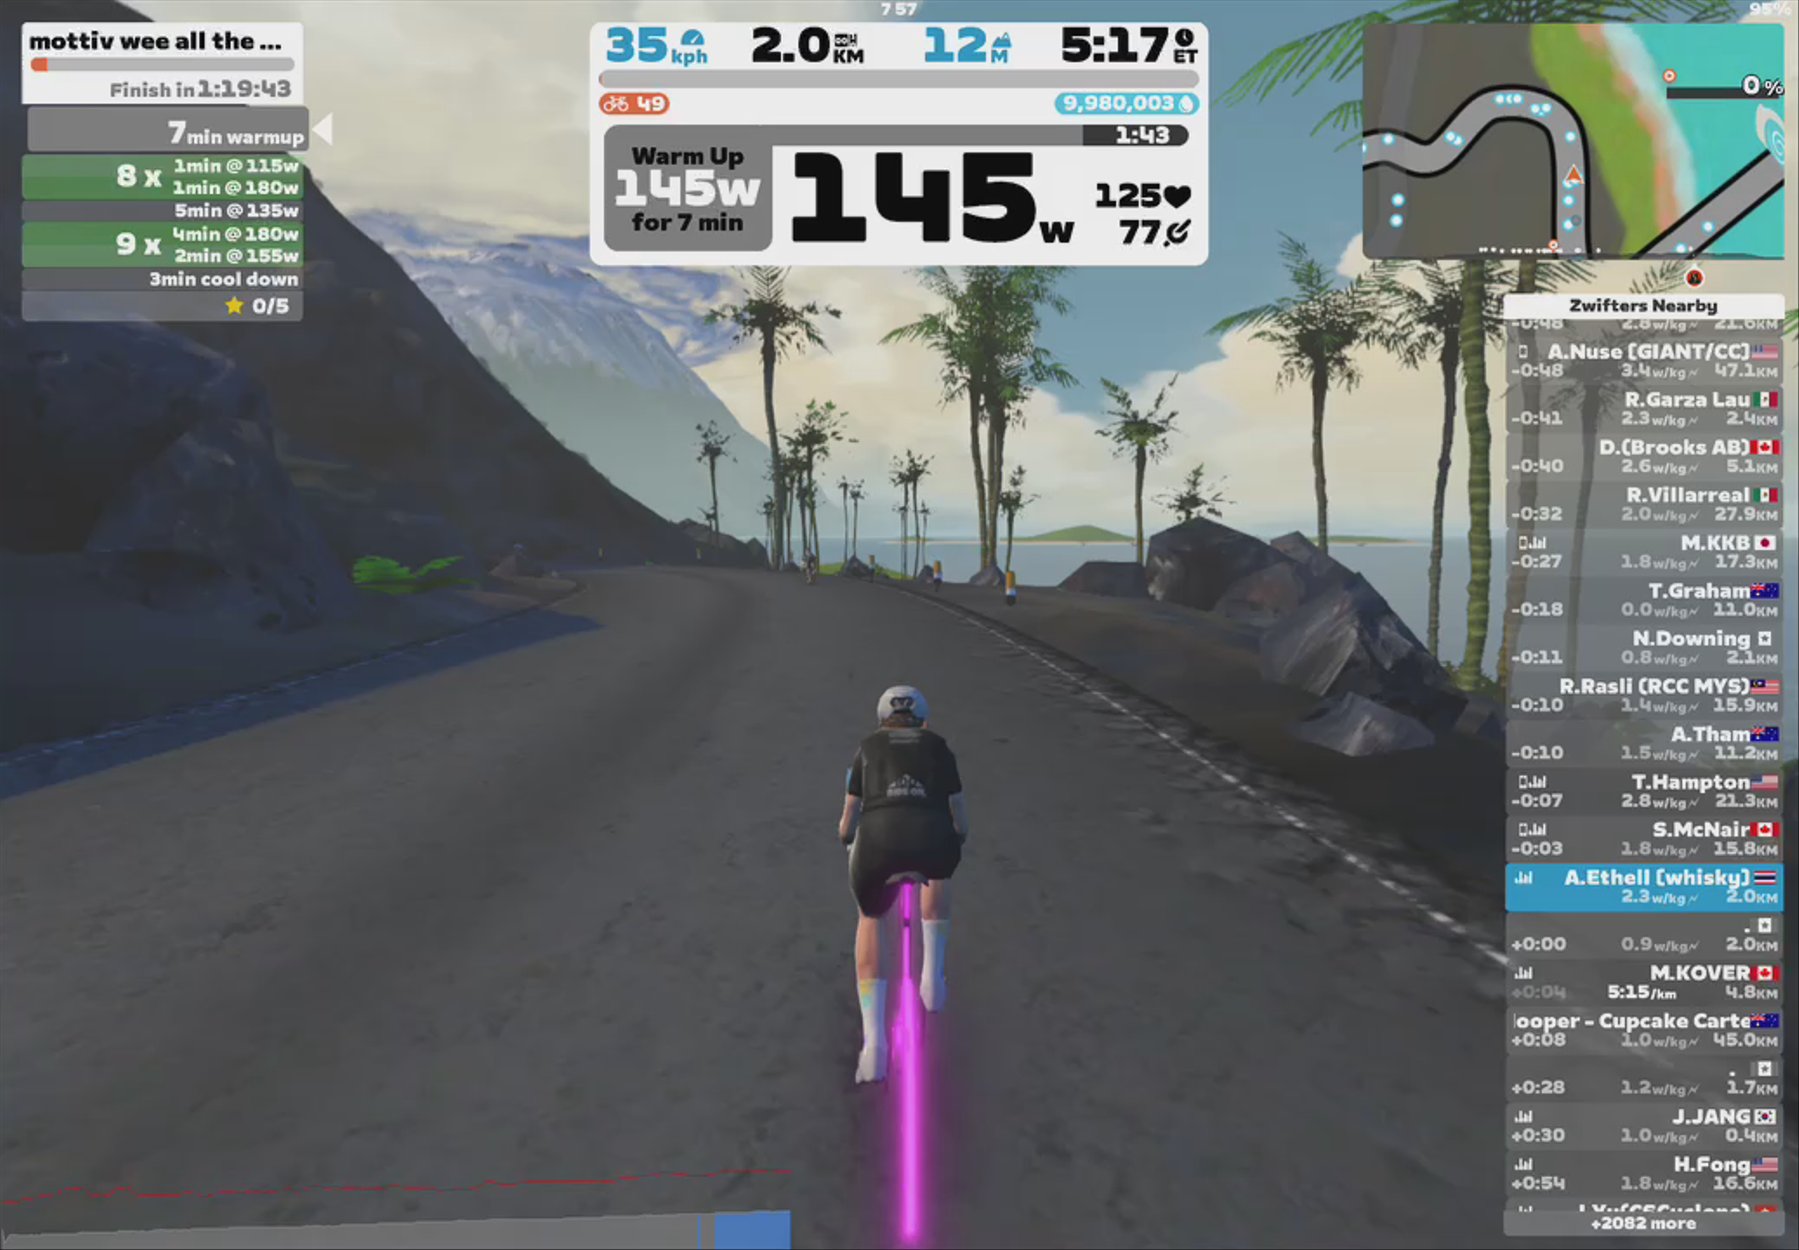 Zwift - mottiv wee all the way home 85m in Watopia